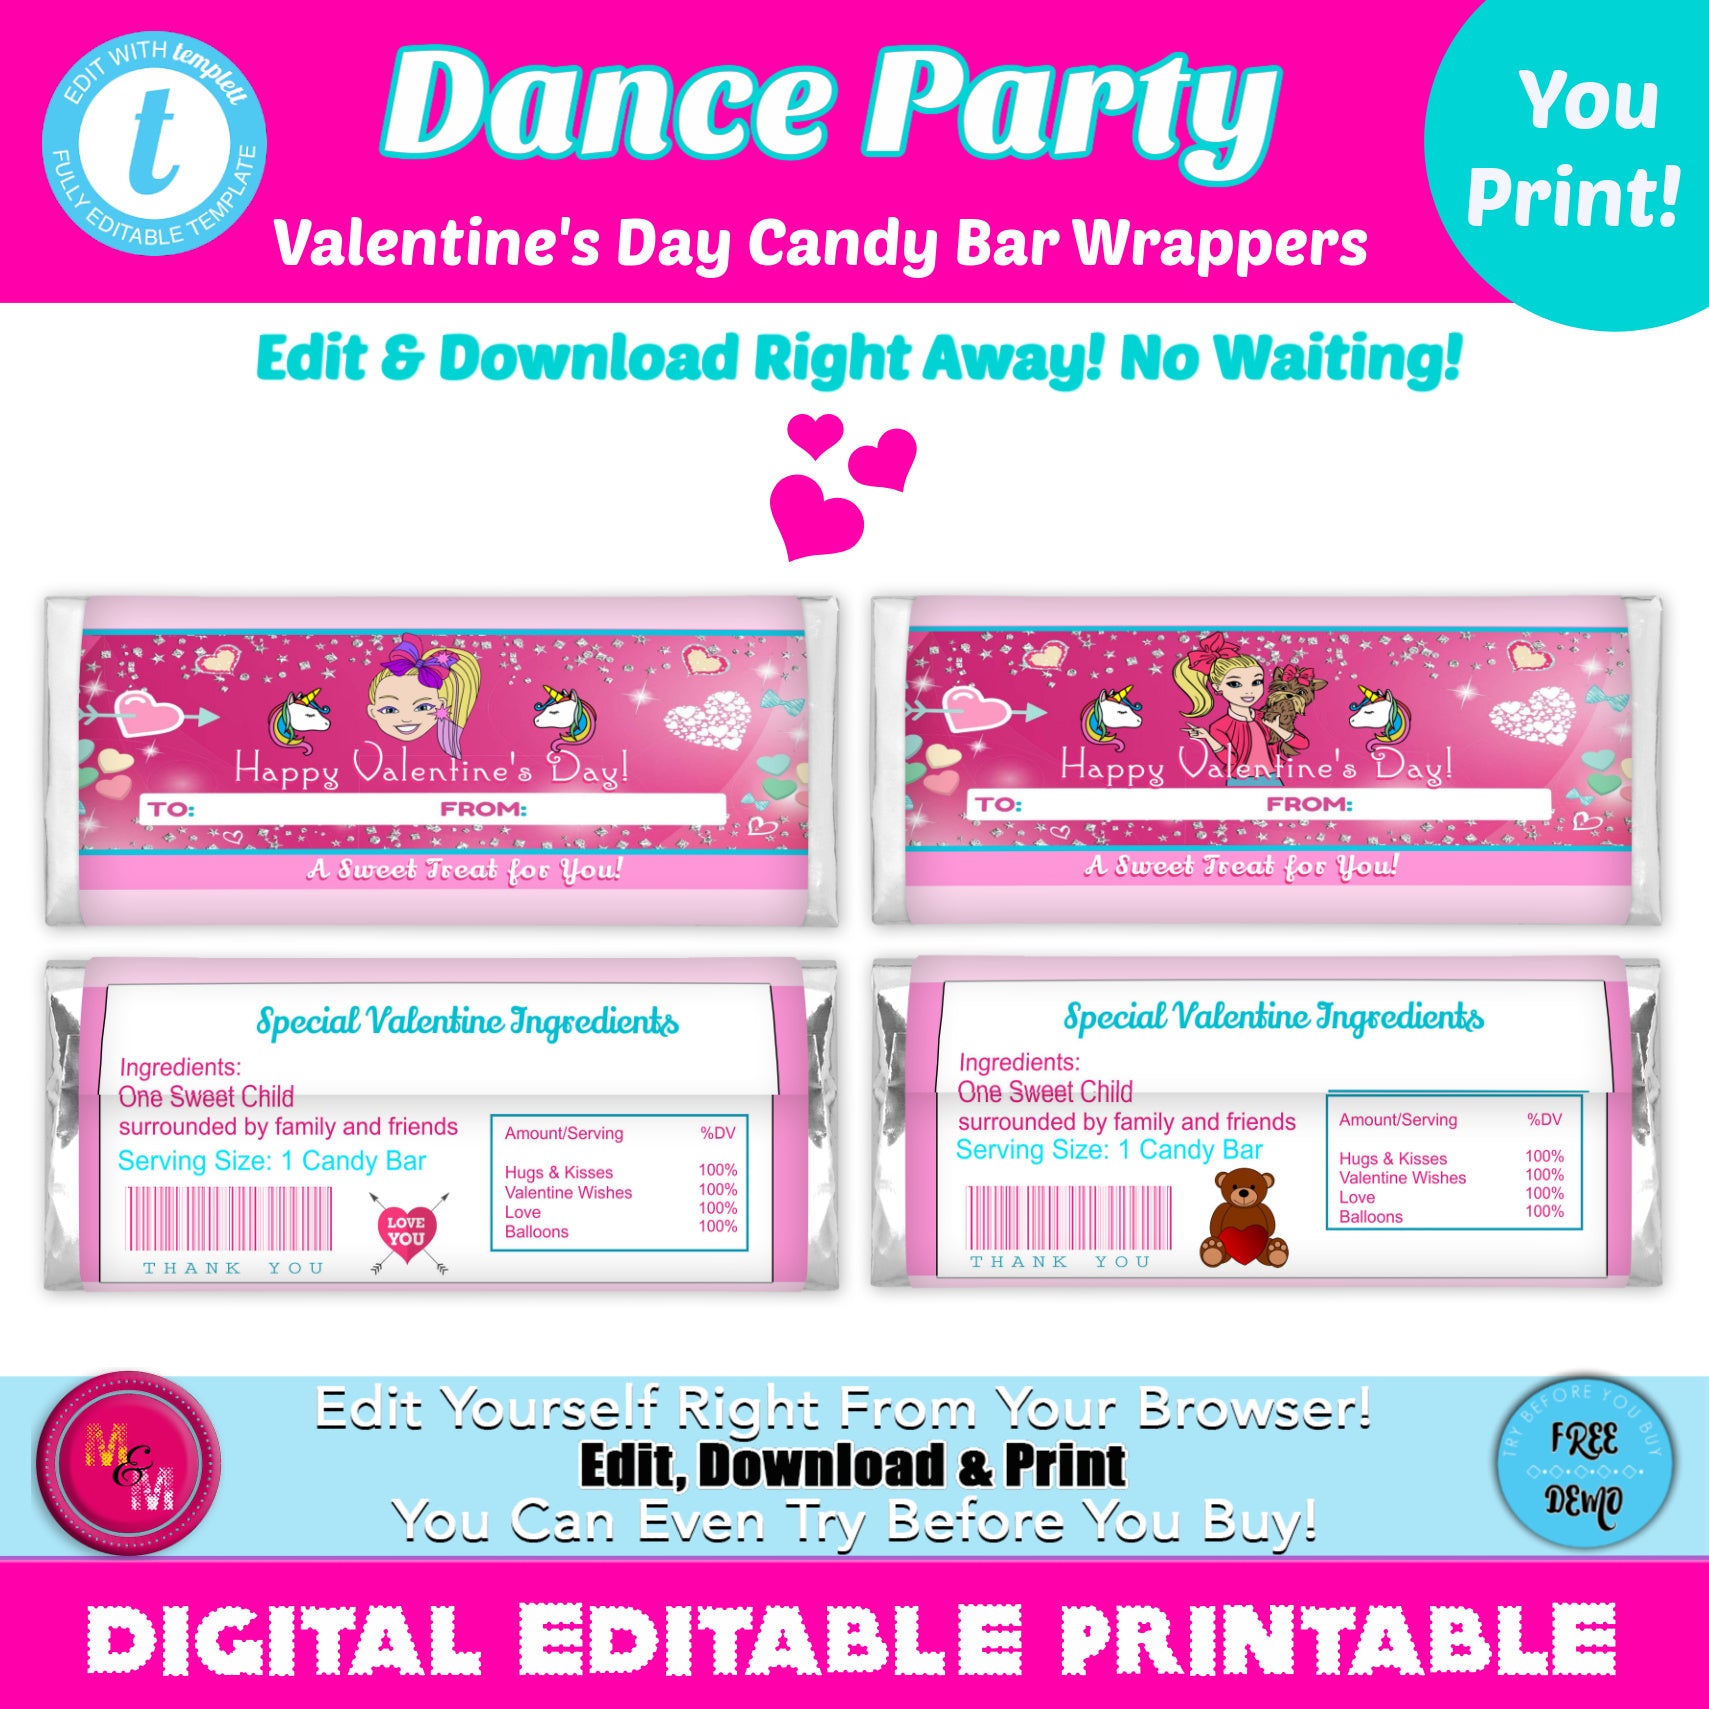 Editable Dance Party Valentine's Day Candy Bar Wrappers Printable, Dance Party Candy Bars, Dance Party Hershey Bar Wrappers